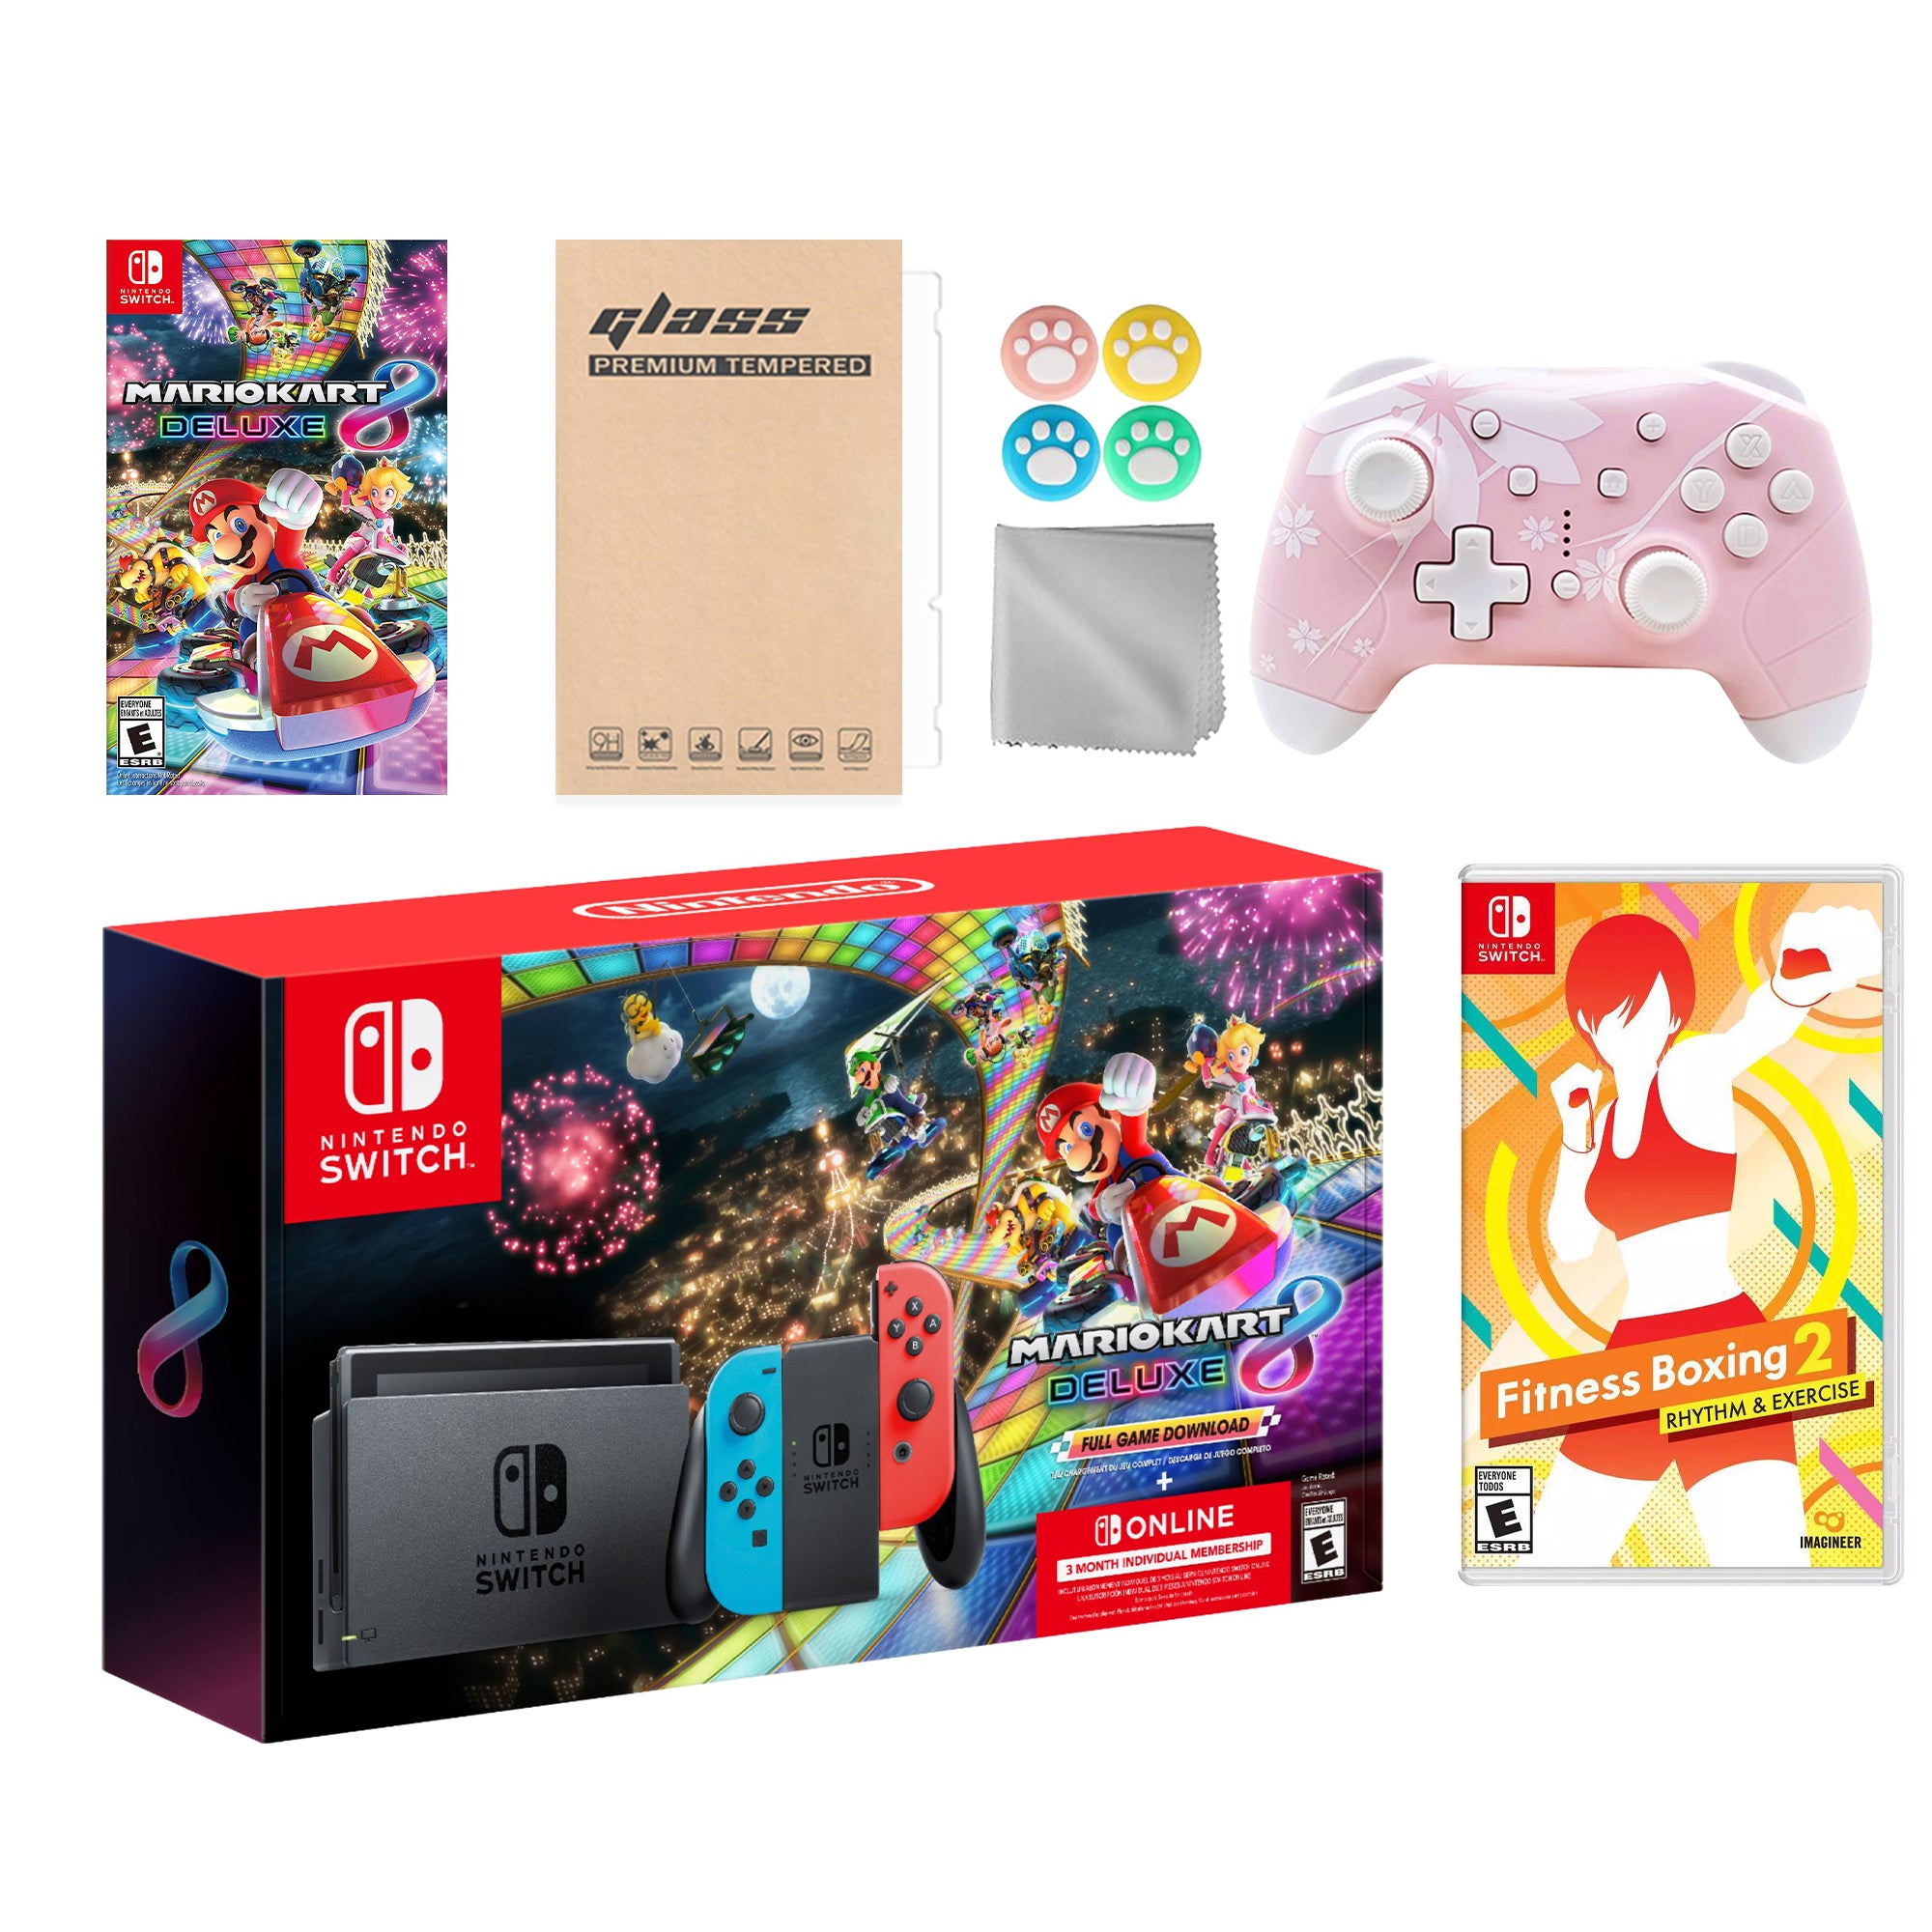 Nintendo Switch Mario Kart 8 Deluxe Bundle: Red Blue Console, Mario Kart 8 & Membership, Fitness Boxing 2: Rhythm & Exercise, Mytrix Wireless Pro Controller Pink Cherry Blossom and Accessories